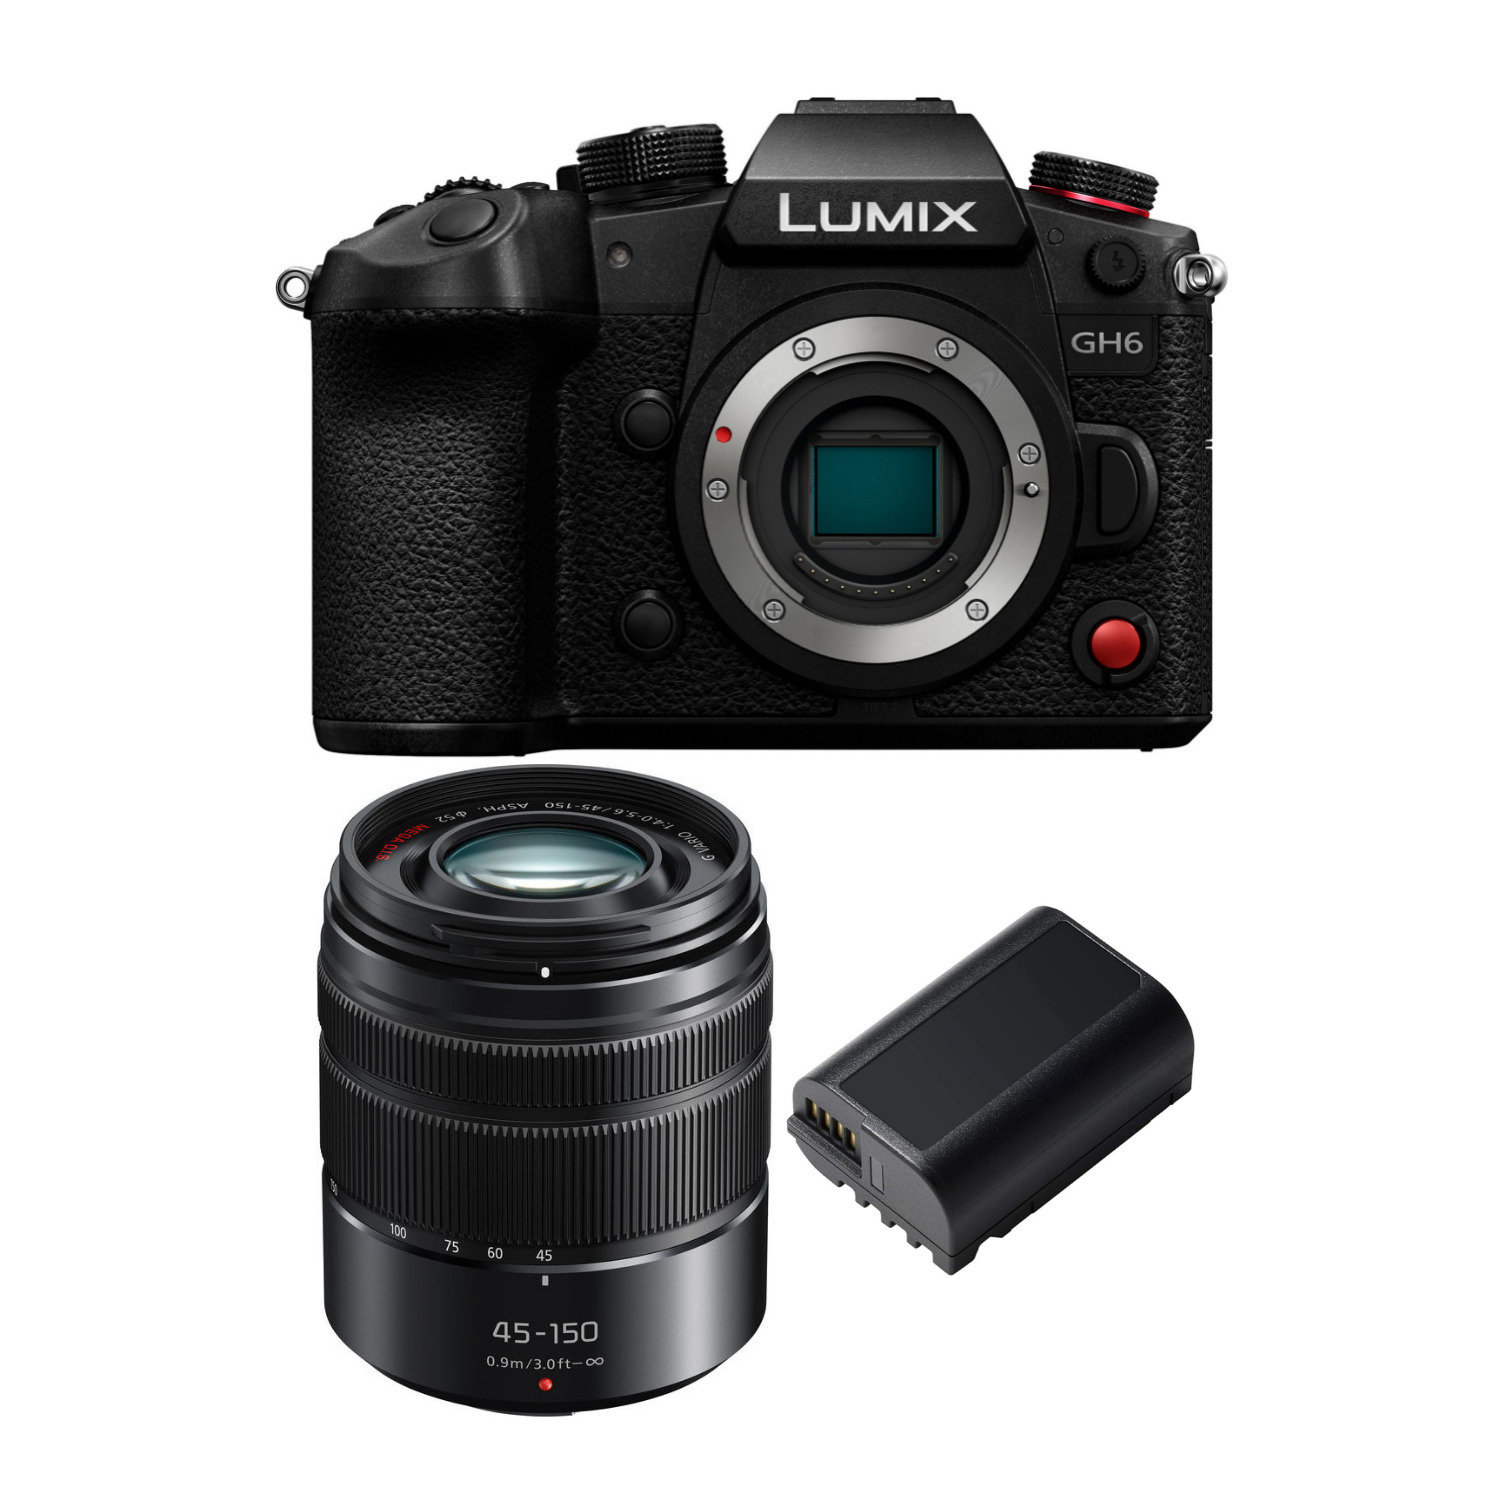 Panasonic LUMIX GH6 Mirrorless Camera Body with LUMIX F4.0-5.6 G Vario OIS Camera Lens and Battery Pack in Black